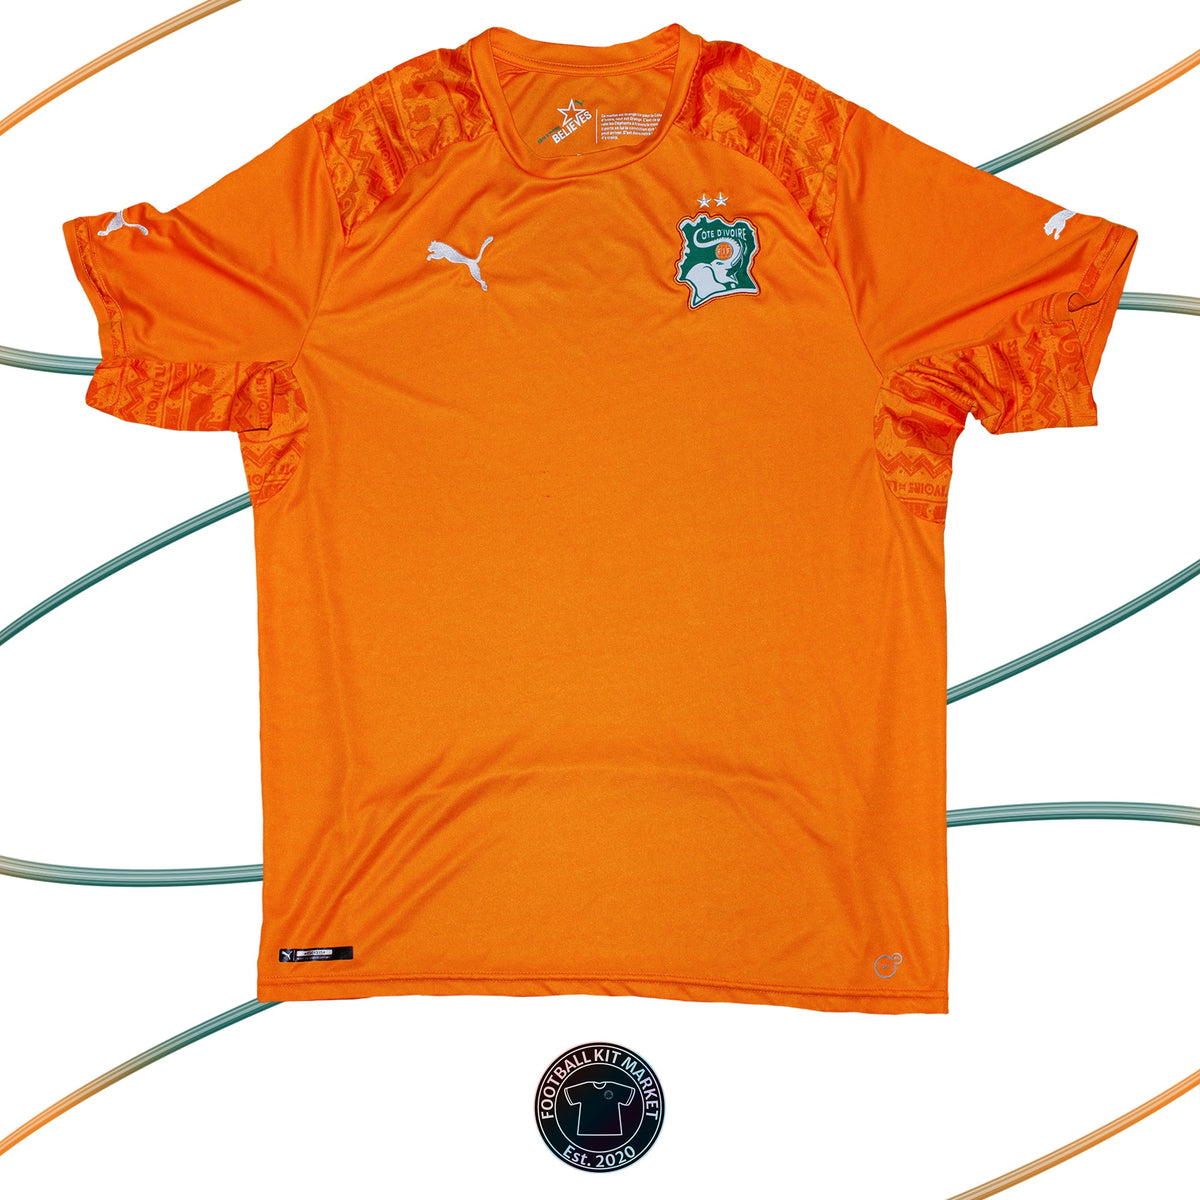 Genuine IVORY COAST (COTE D'IVOIRE) Home (2014-2016) - PUMA (L) - Product Image from Football Kit Market